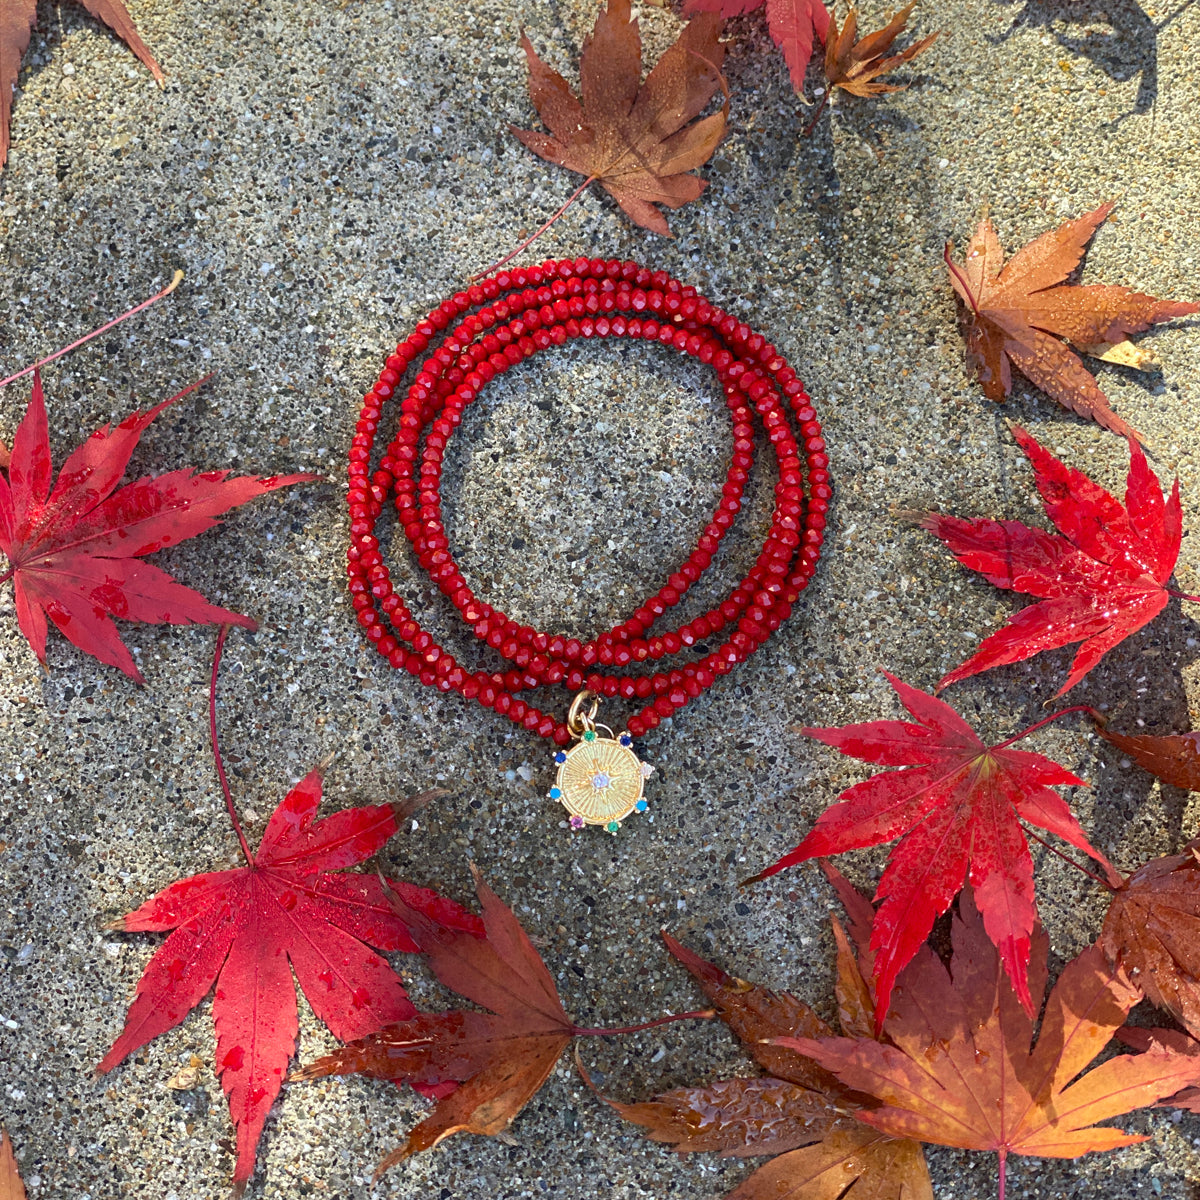 Burgundy Red Crystal Wrap Bracelet with The Medicine Wheel to Restore Harmony in Your Life. The Medicine Wheel is an ancient Indian practice of balance and harmony within the Four Directions. A Healing Journey that can restore Wholeness and Connection to Ourselves and to the World.